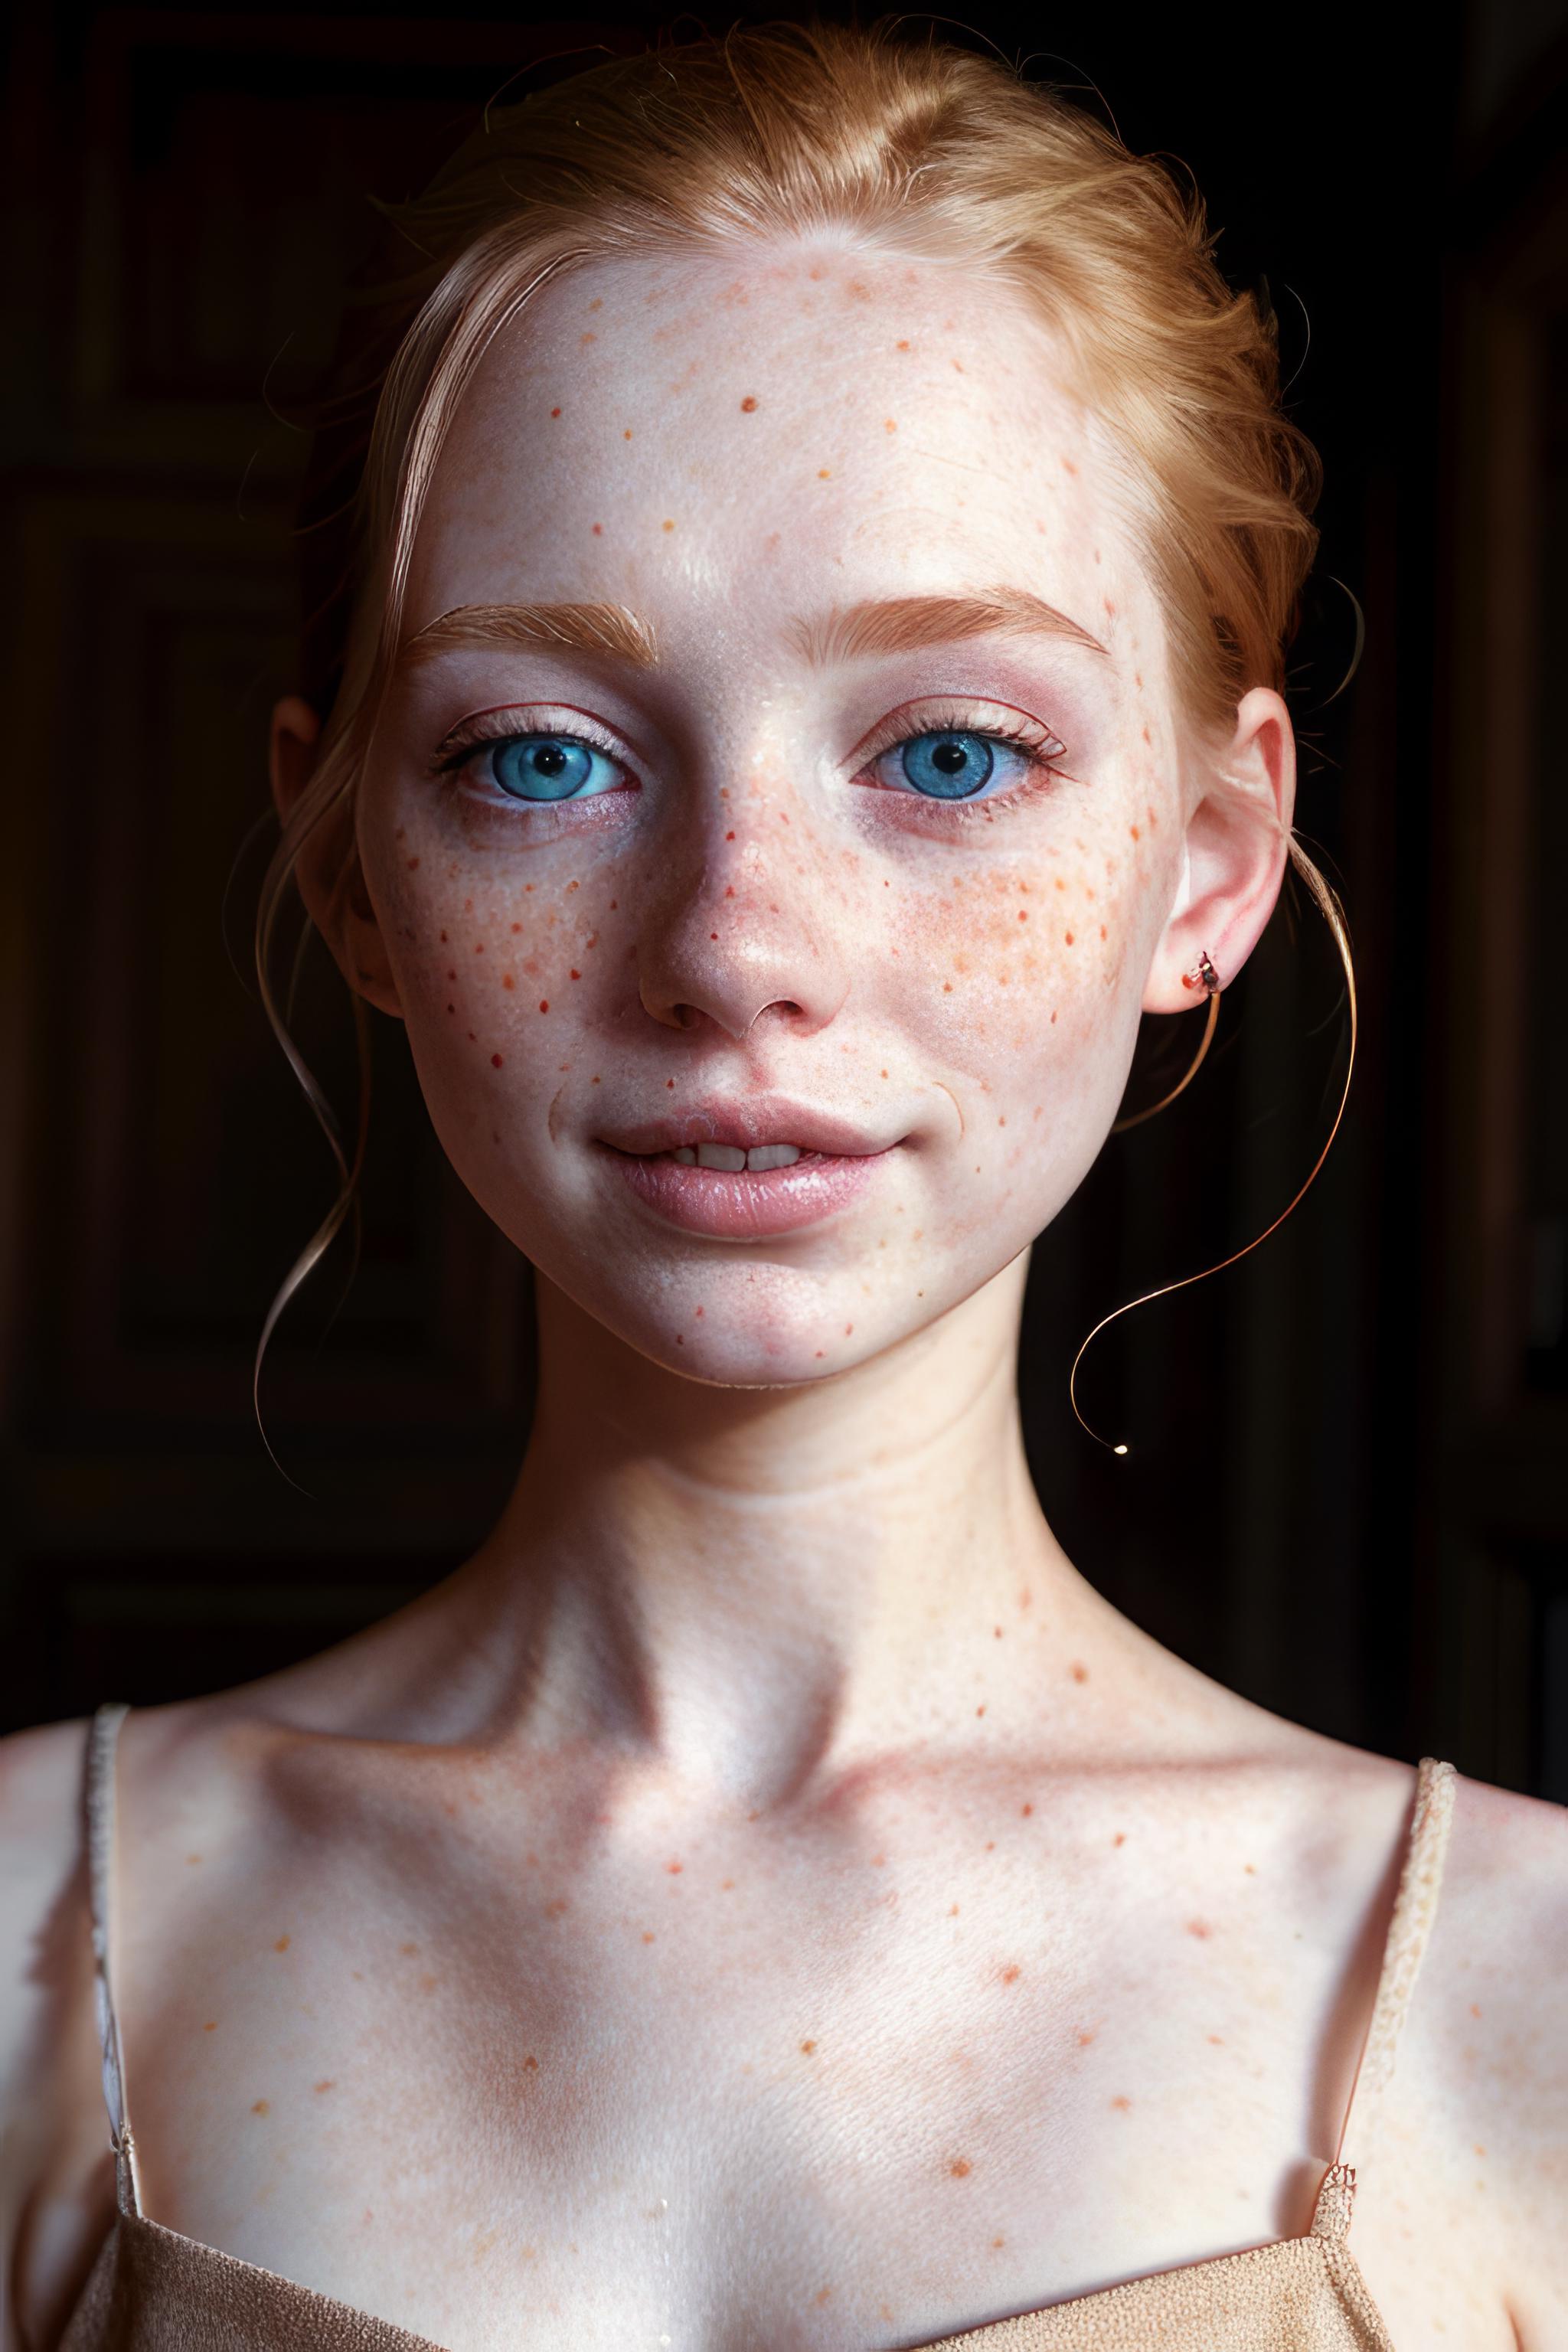 A young woman with freckles and blue eyes posing for a close-up photograph.